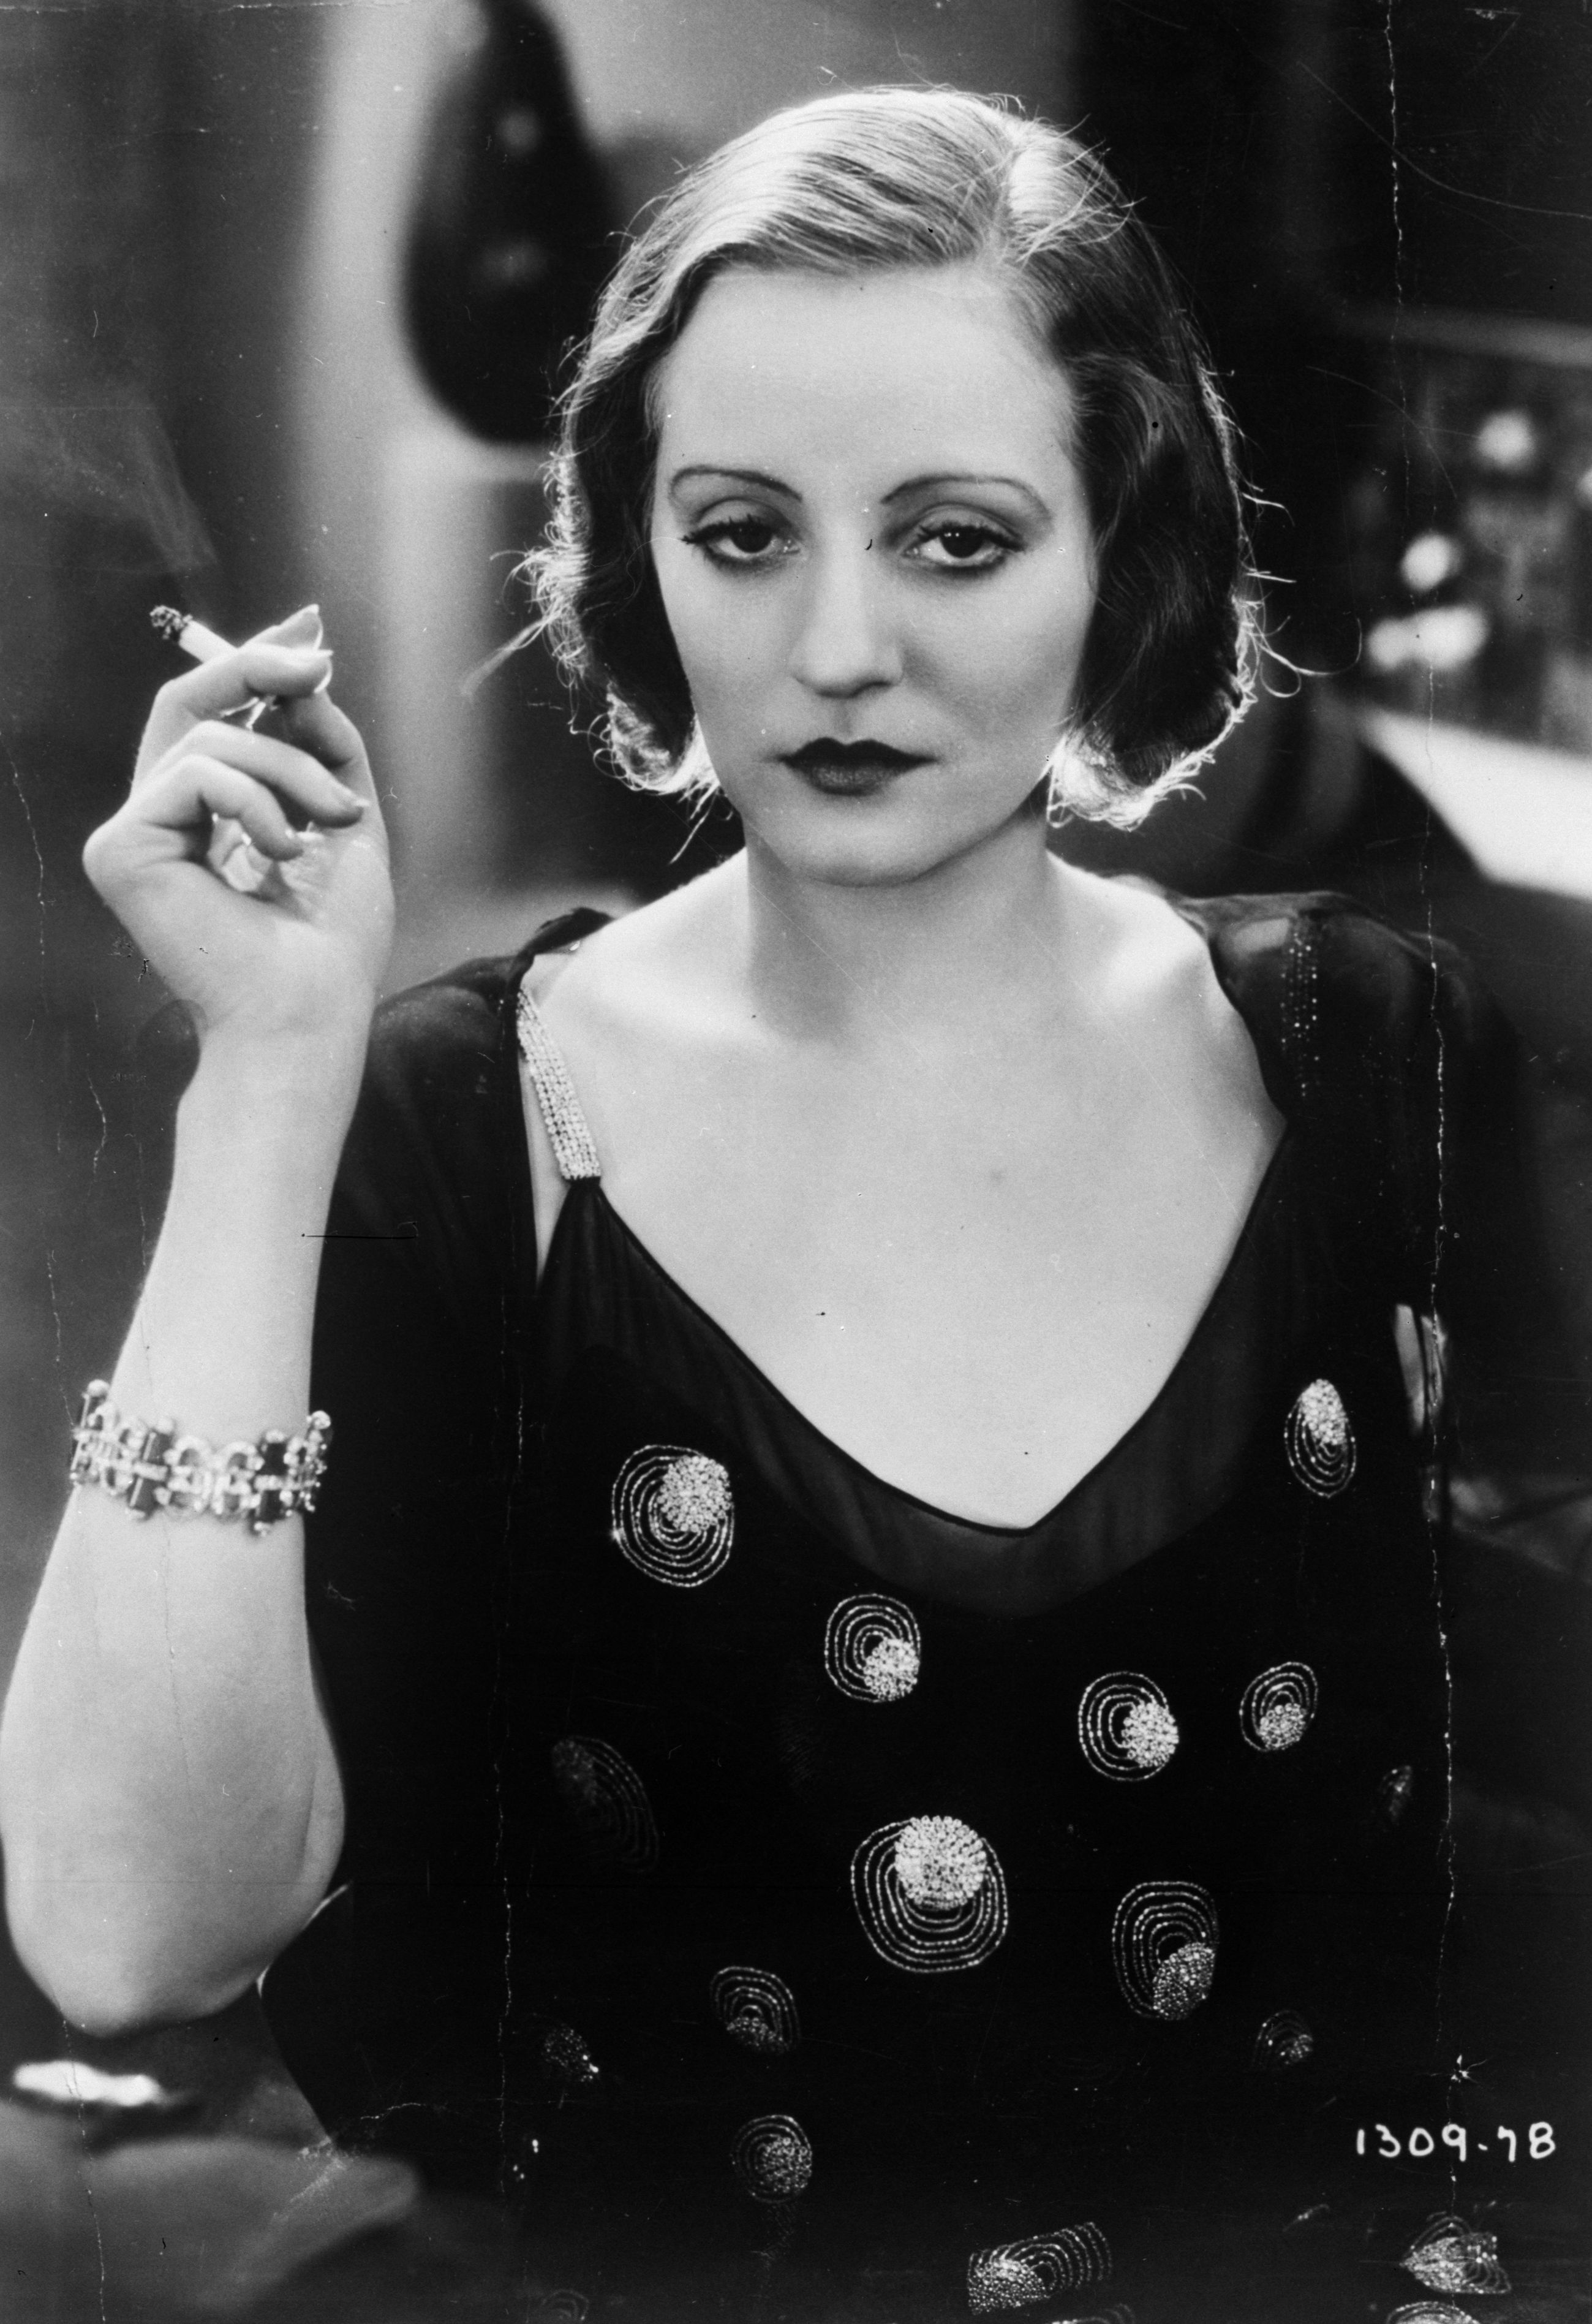 Tallulah Bankhead was said to partially inspire the animated version of Cruella de Vil. (General Photographic Agency/Getty Images)